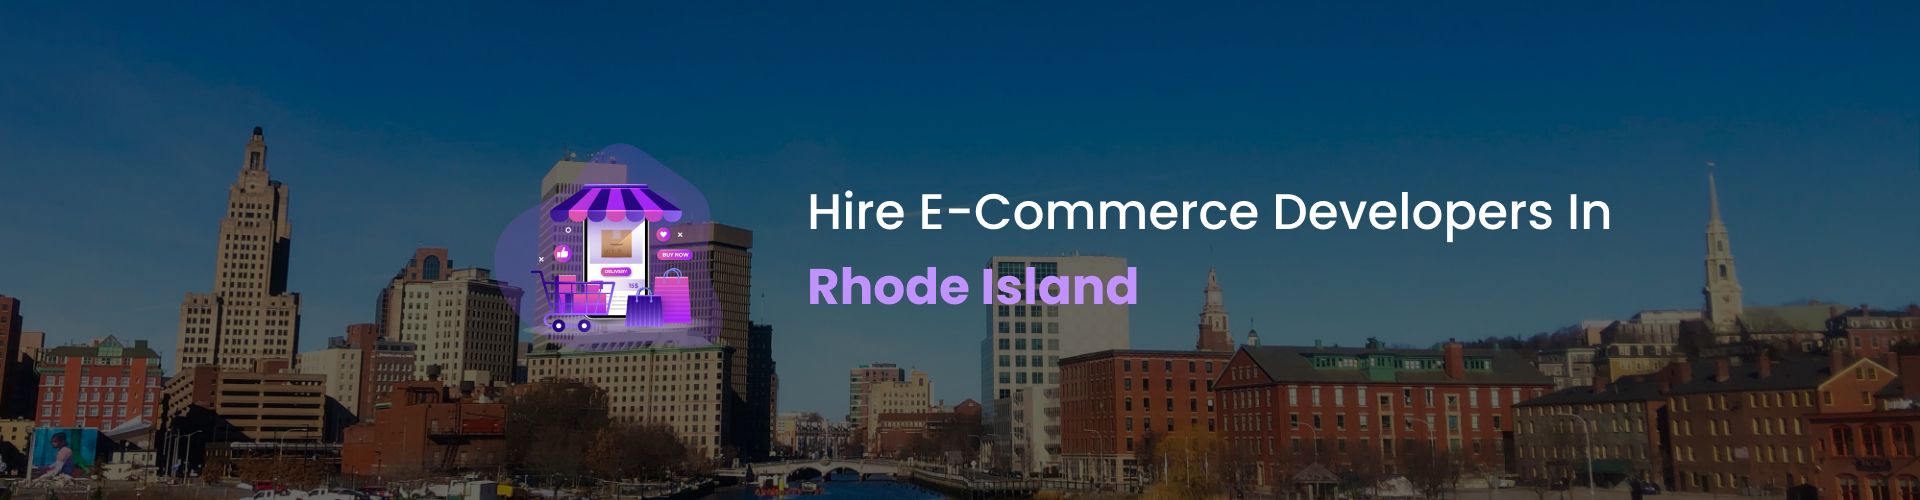 hire ecommerce developers in rhode island